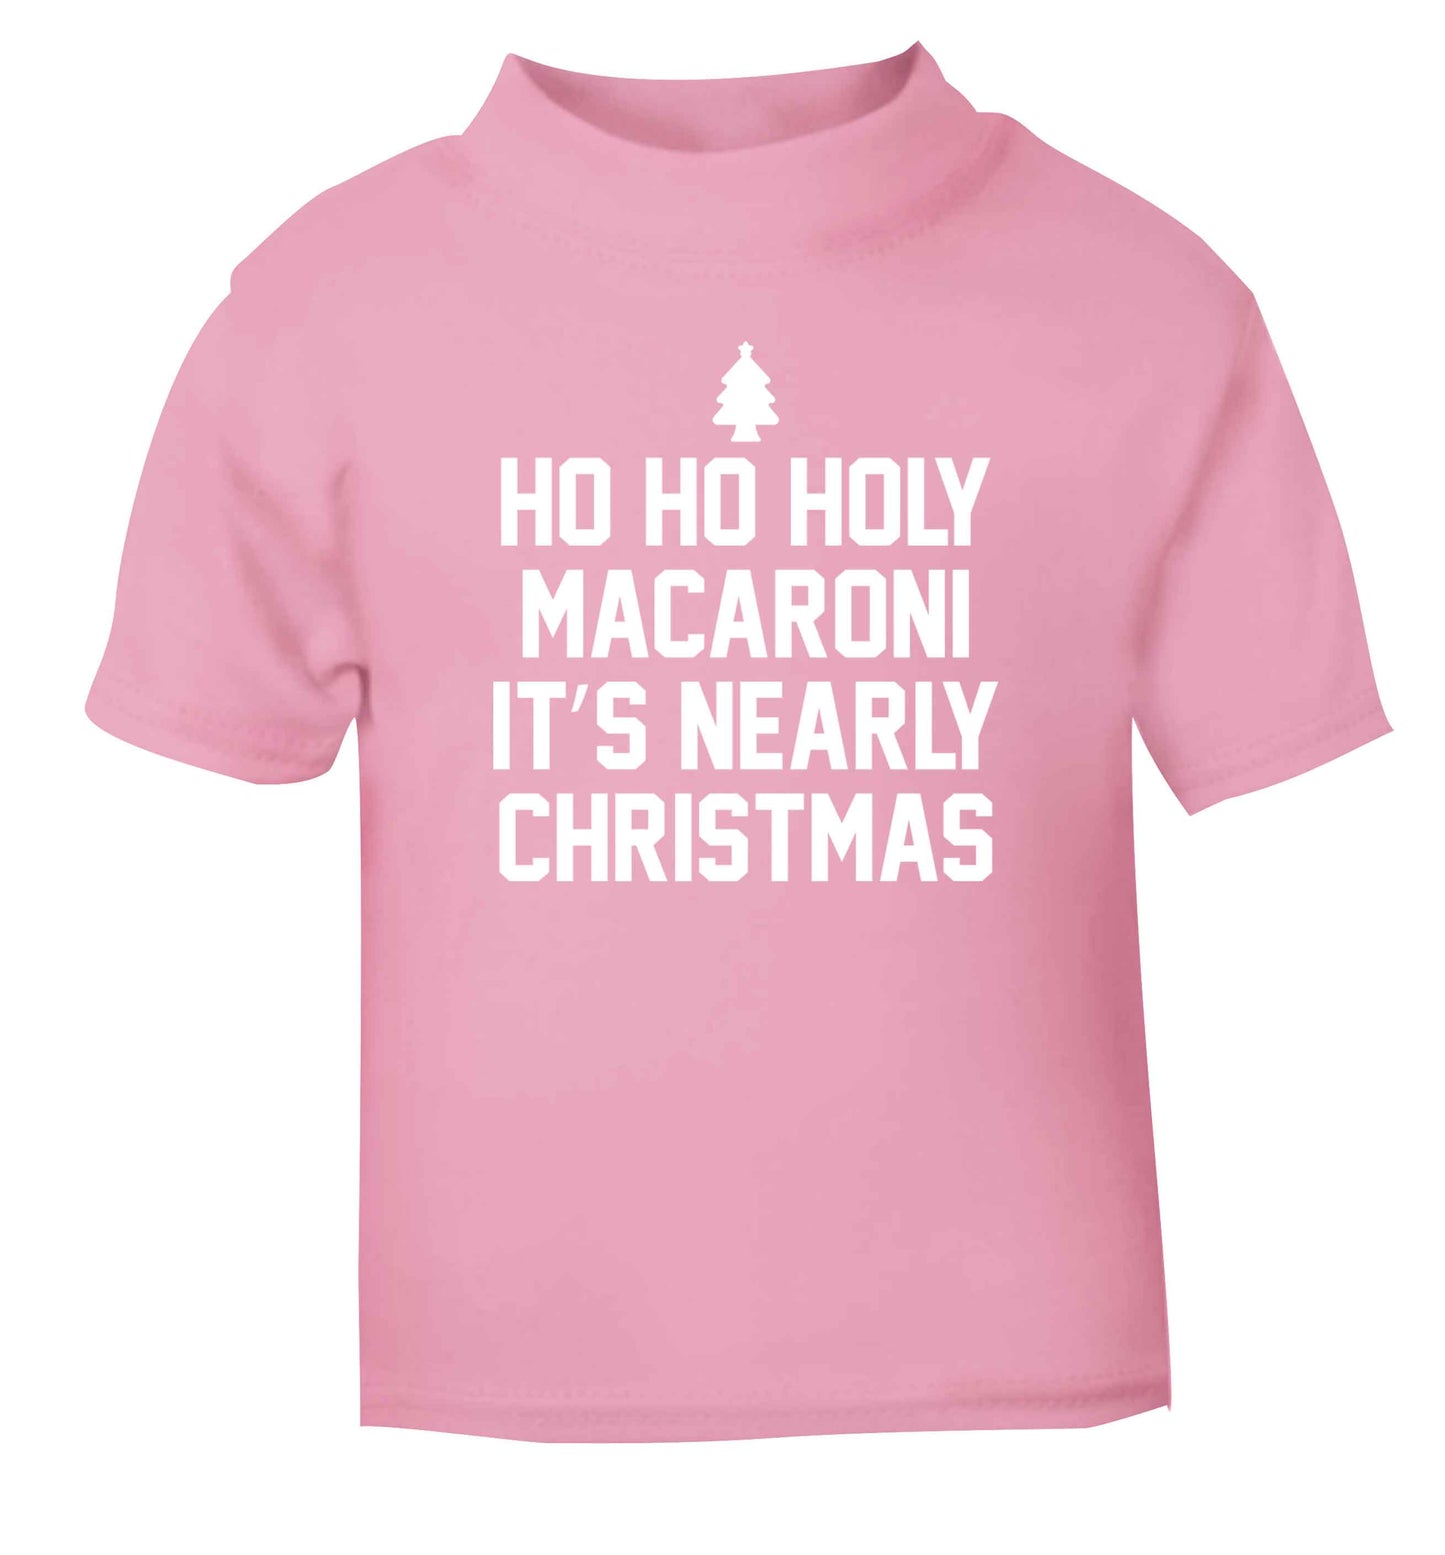 Ho ho holy macaroni it's nearly Christmas light pink Baby Toddler Tshirt 2 Years